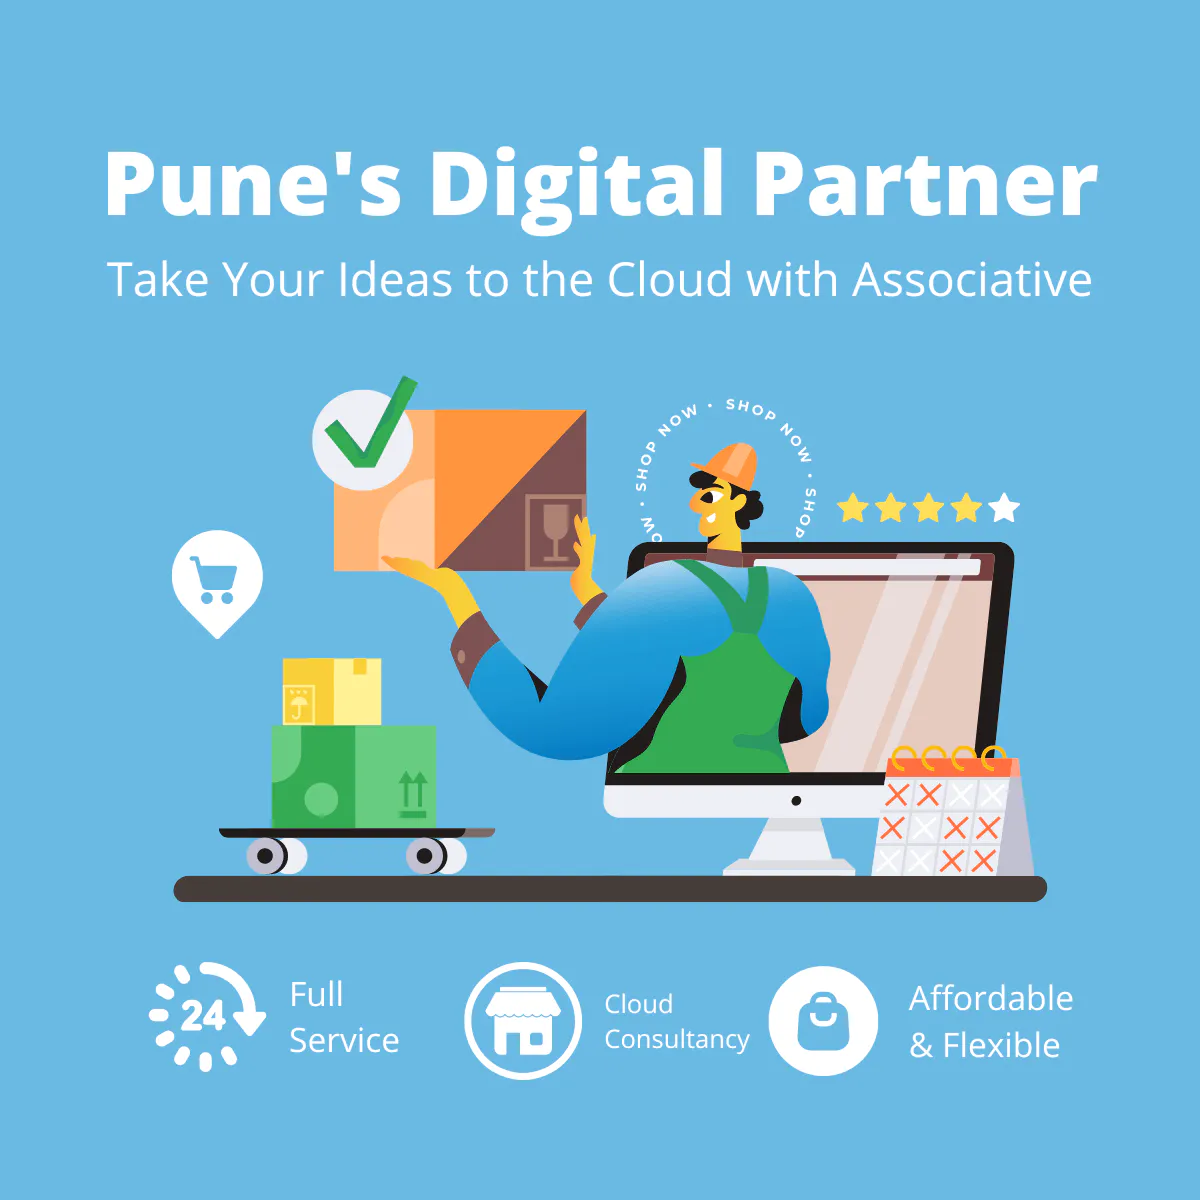 Pune's Digital Partner: Take Your Ideas to the Cloud with Associative